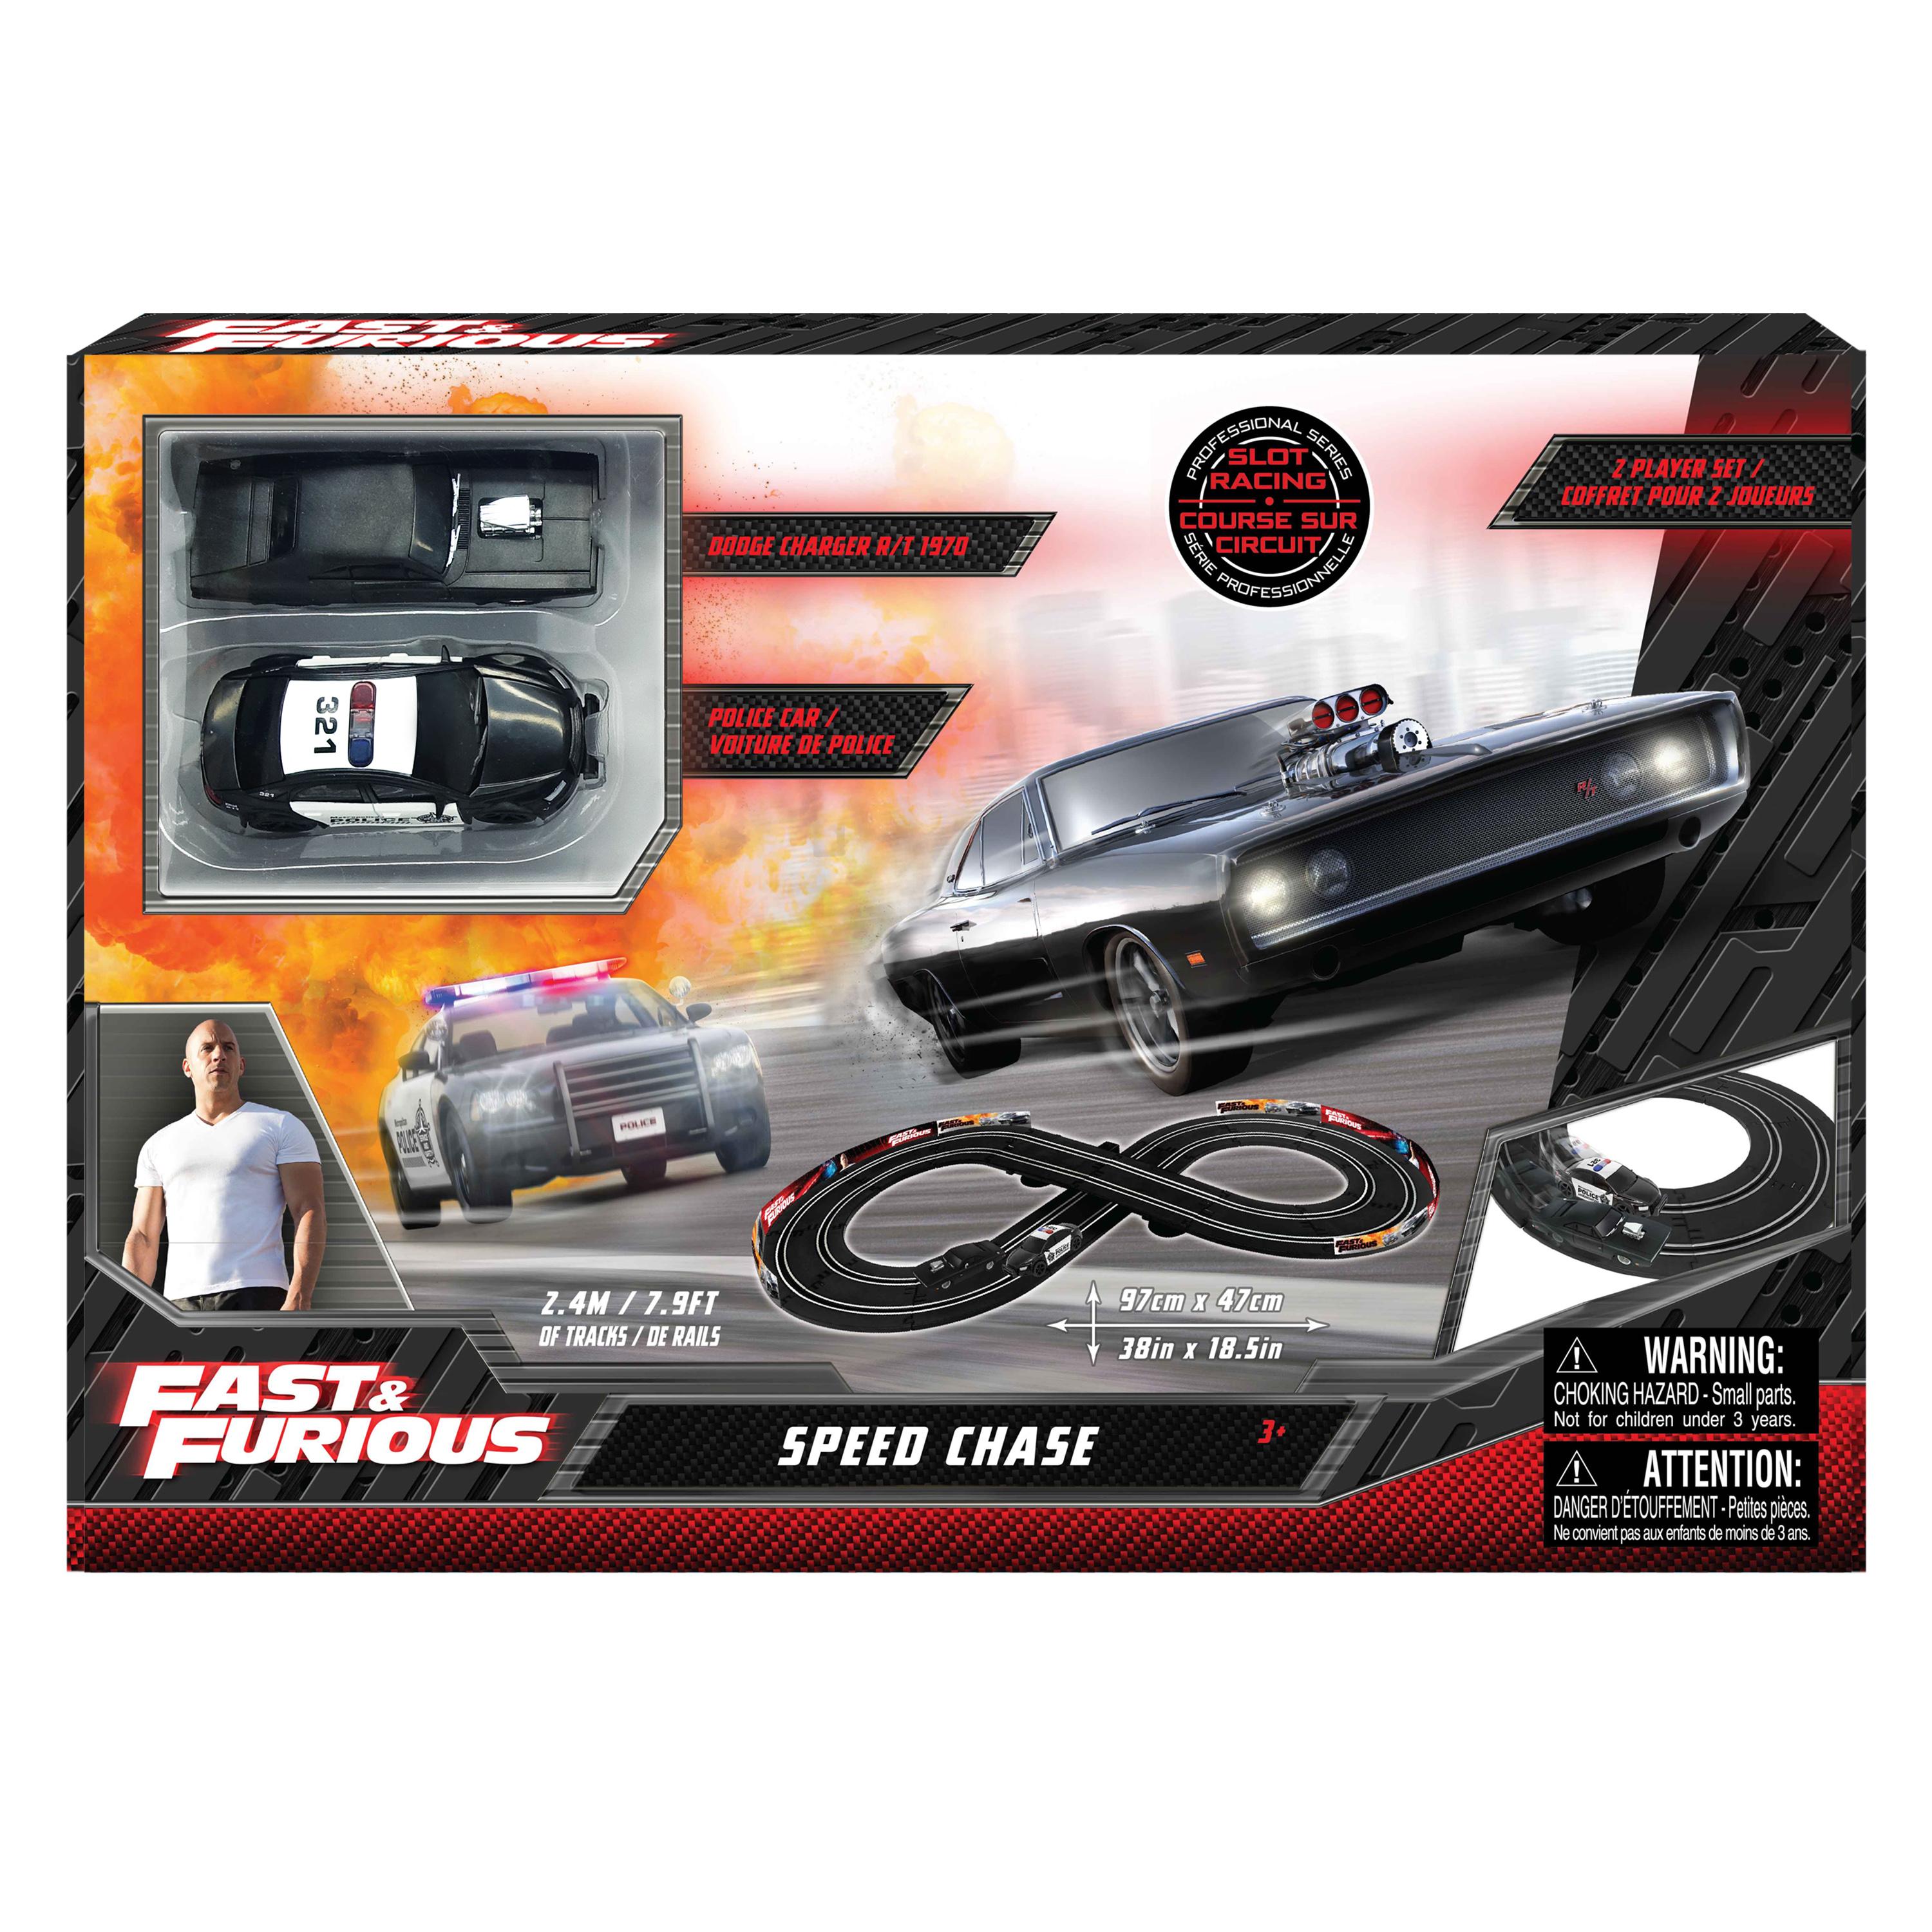 Fast & Furious Speed Chase - Figure 8 Layout Design